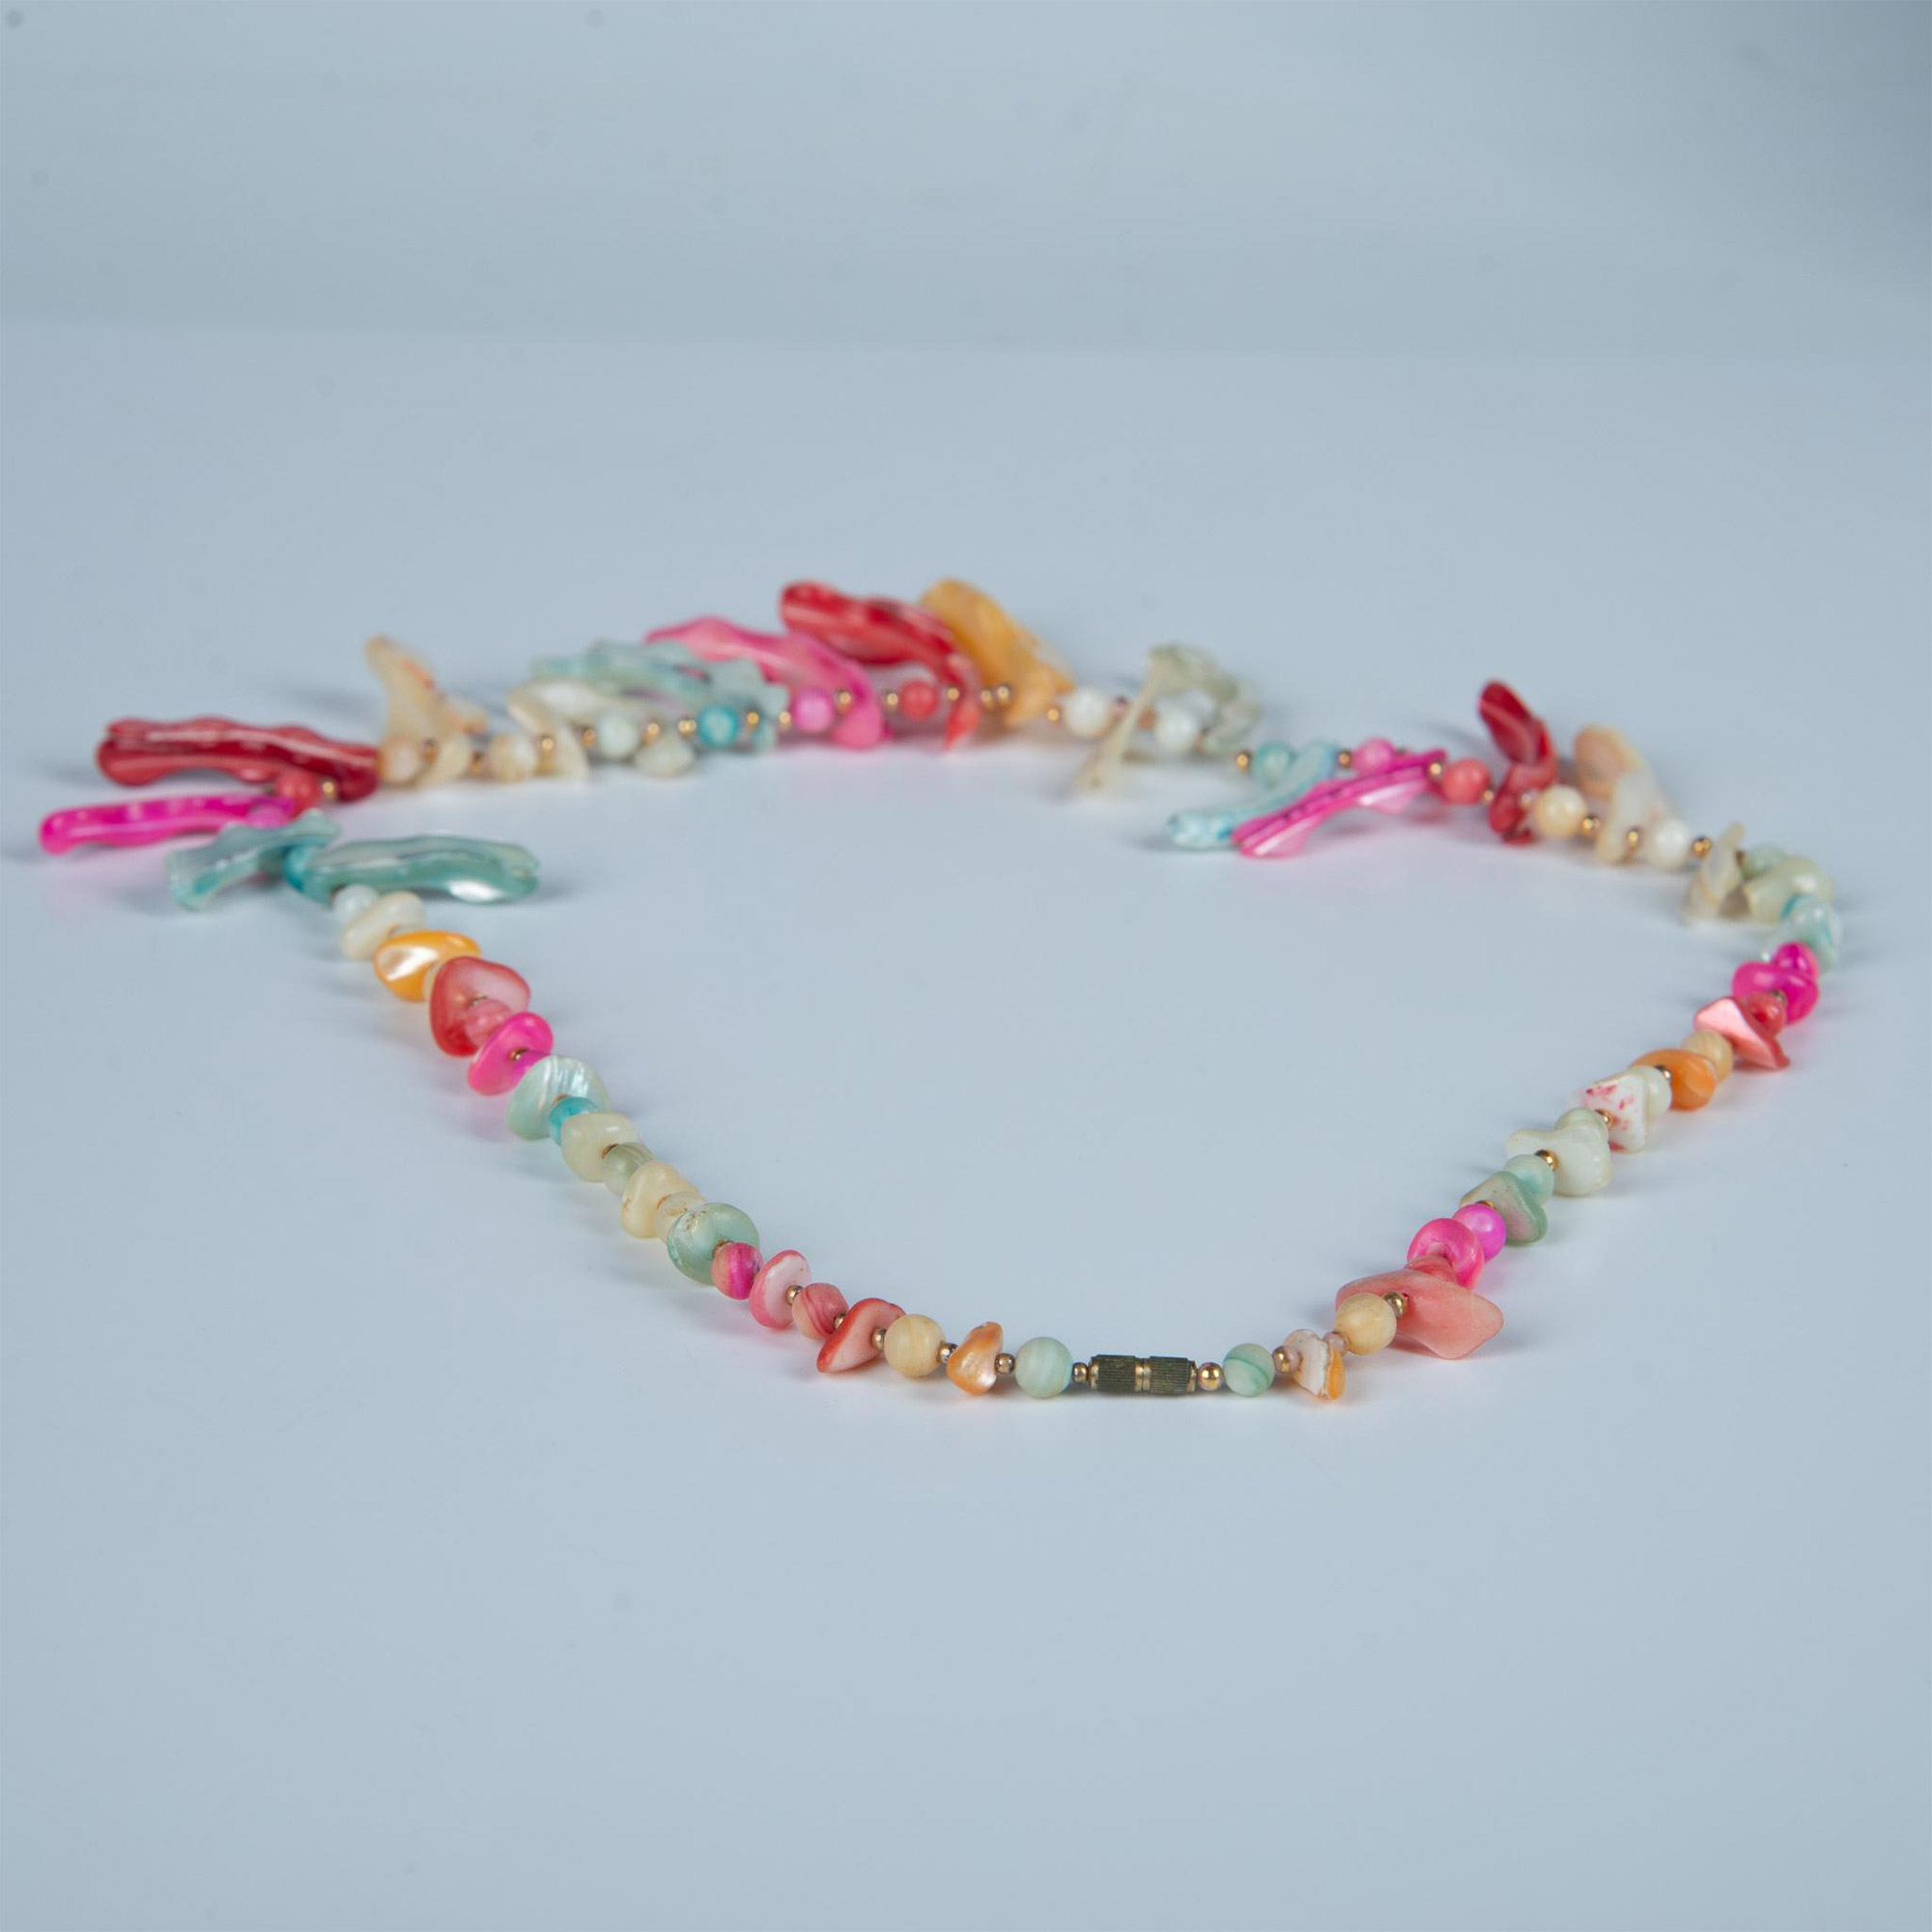 Pastel Beads and Shell Fragments Necklace - Image 3 of 3